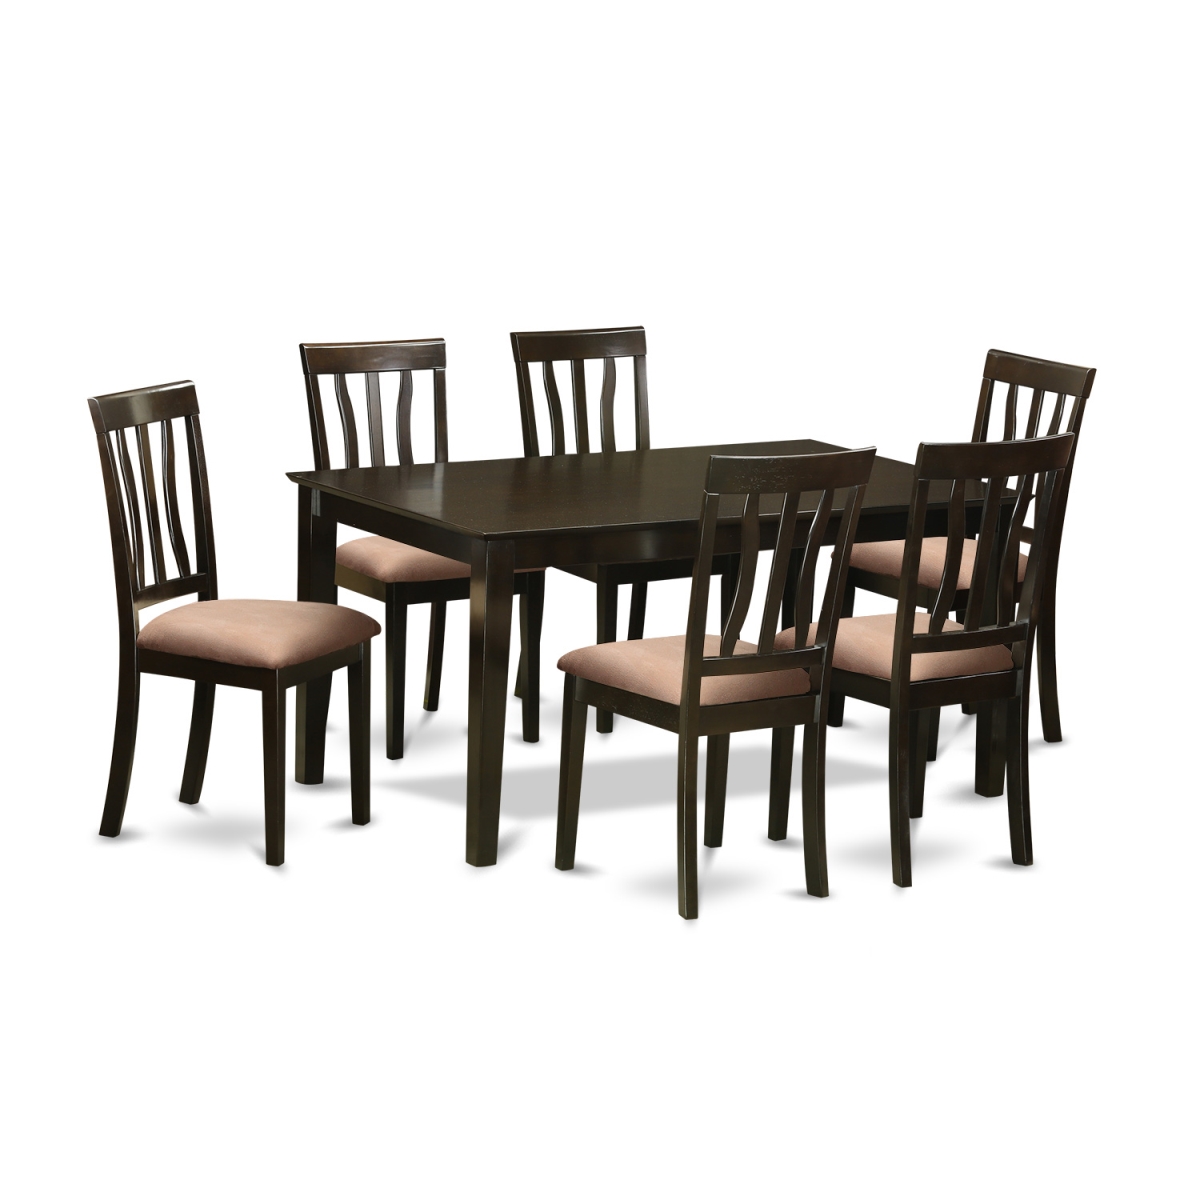 Picture of East West Furniture CAAN7-CAP-C Dining Table Set with 6 Dining Room Table & 6 Chairs, Cappuccino - 7 Piece